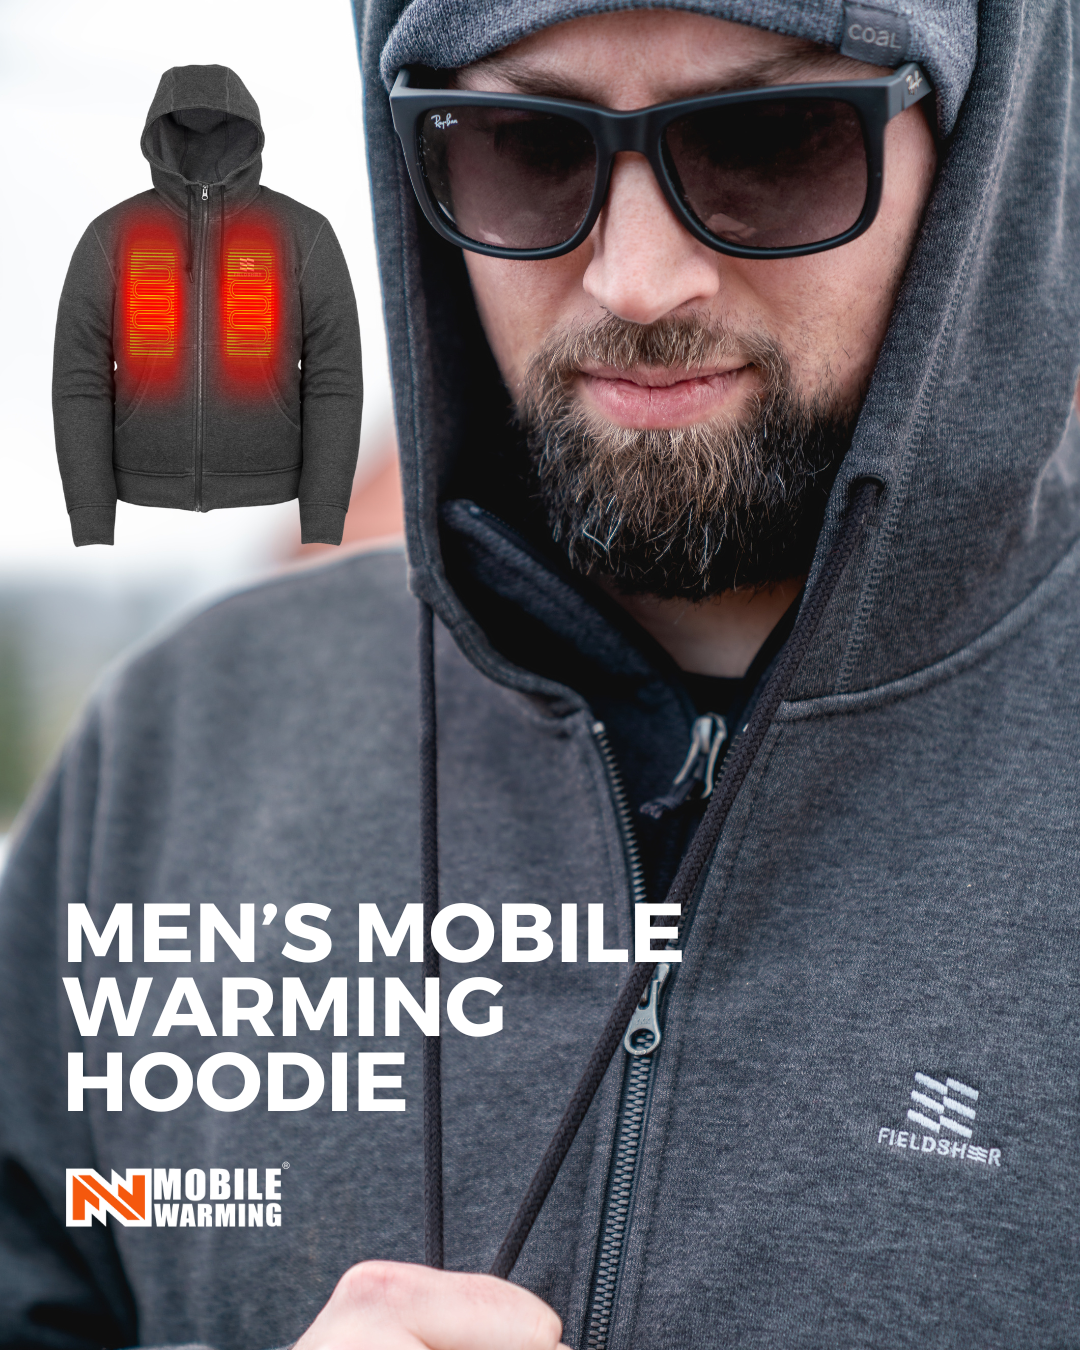 Mobile Warming® Technology Makes Men's Heated Hoodies Unlike Any Others